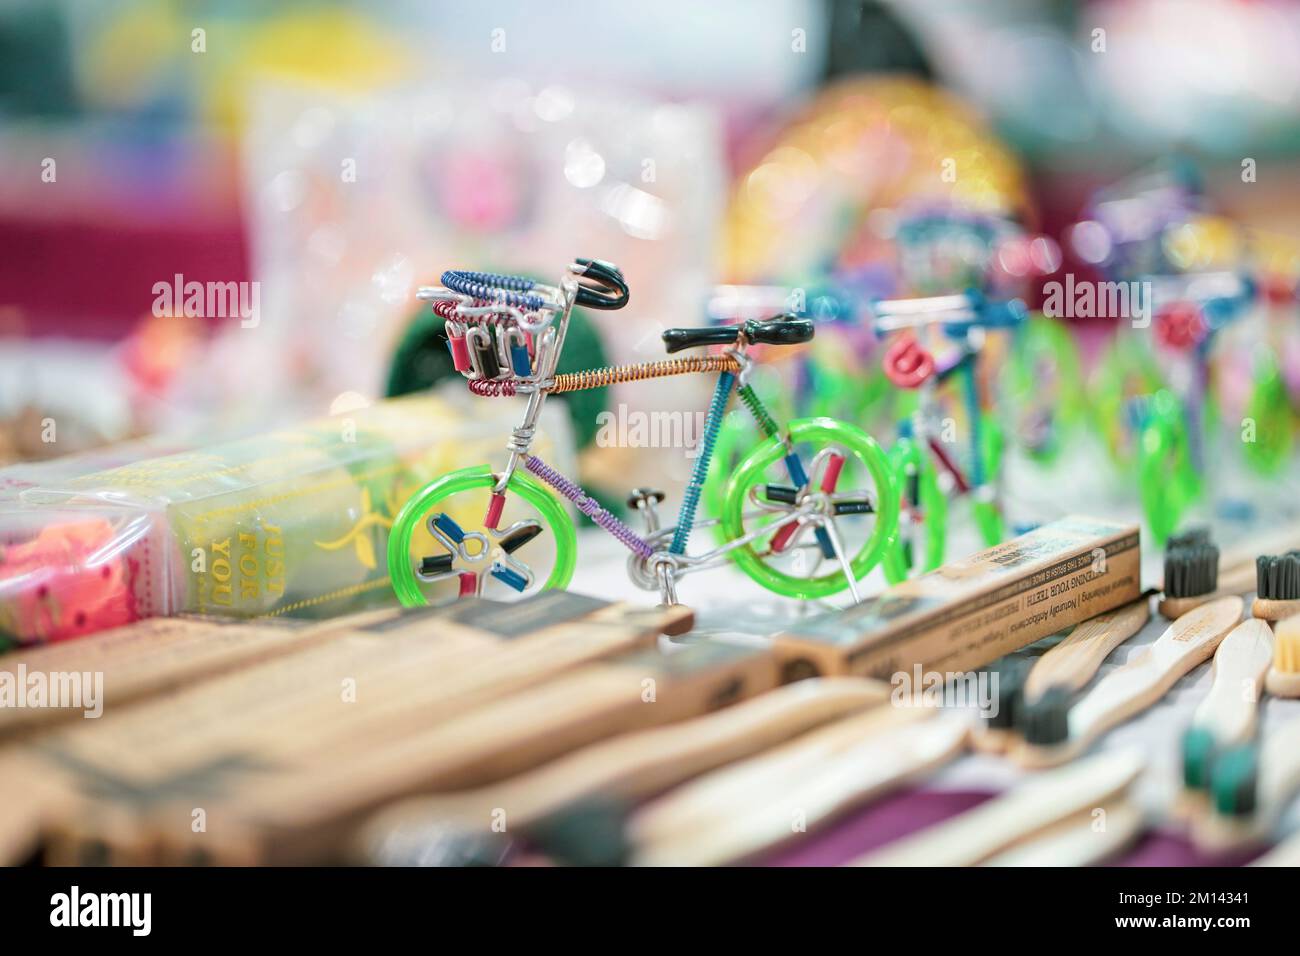 A green color cycle toy showpiece handmade with aluminium children toys in green color selling in market, fair, mall, or store Stock Photo